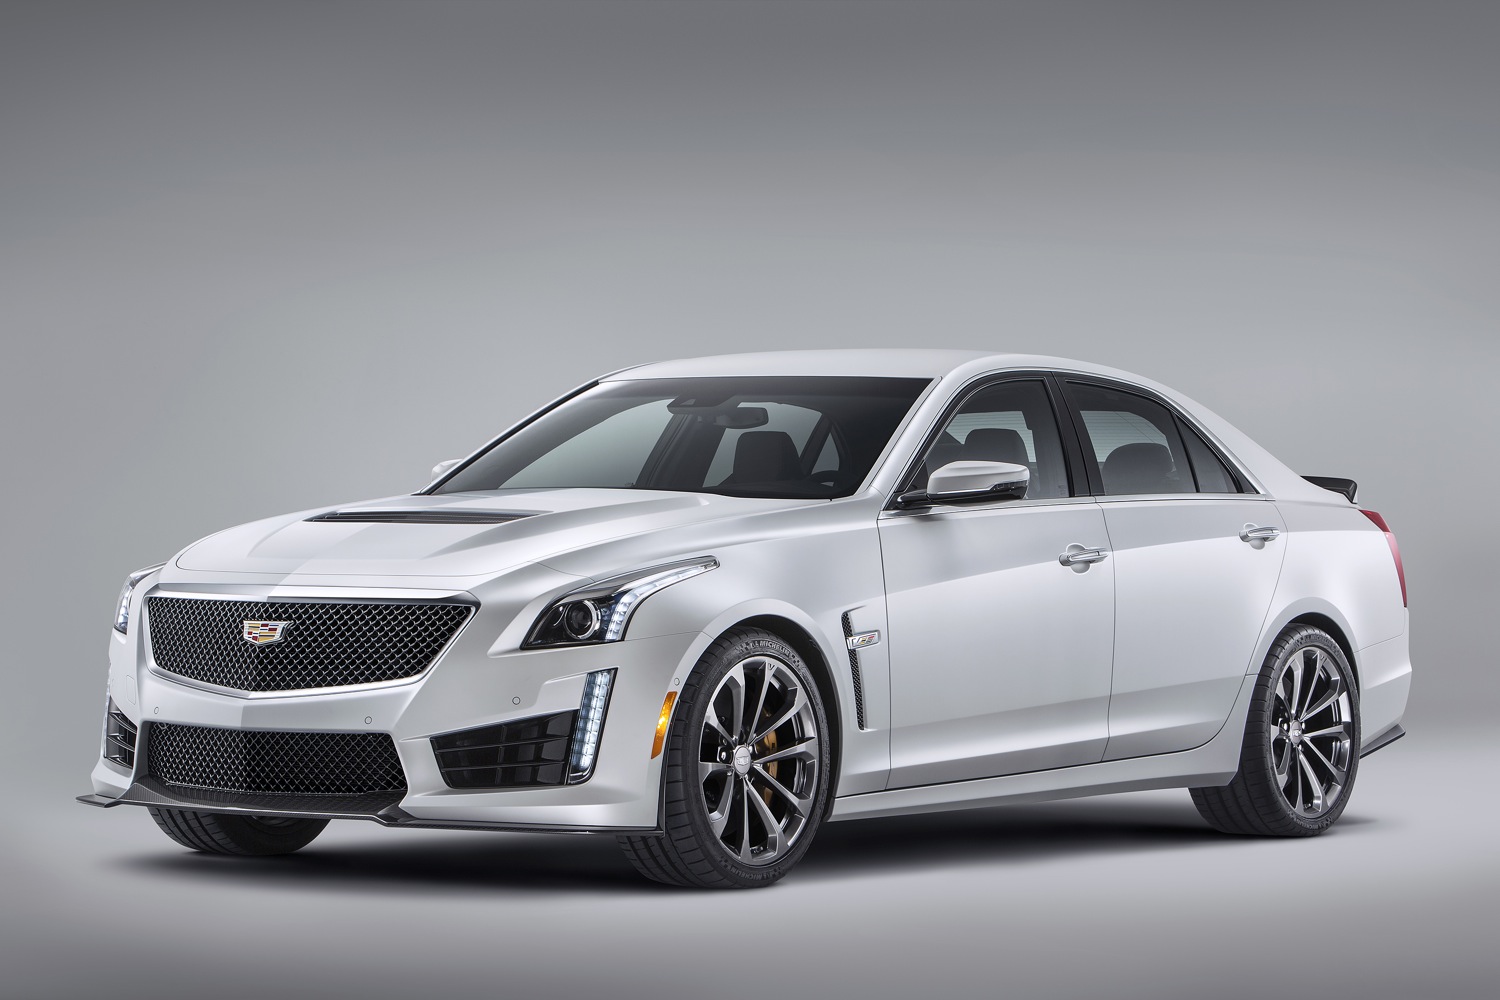 Modern Day Muscle Cars - Cadillac CTS-V